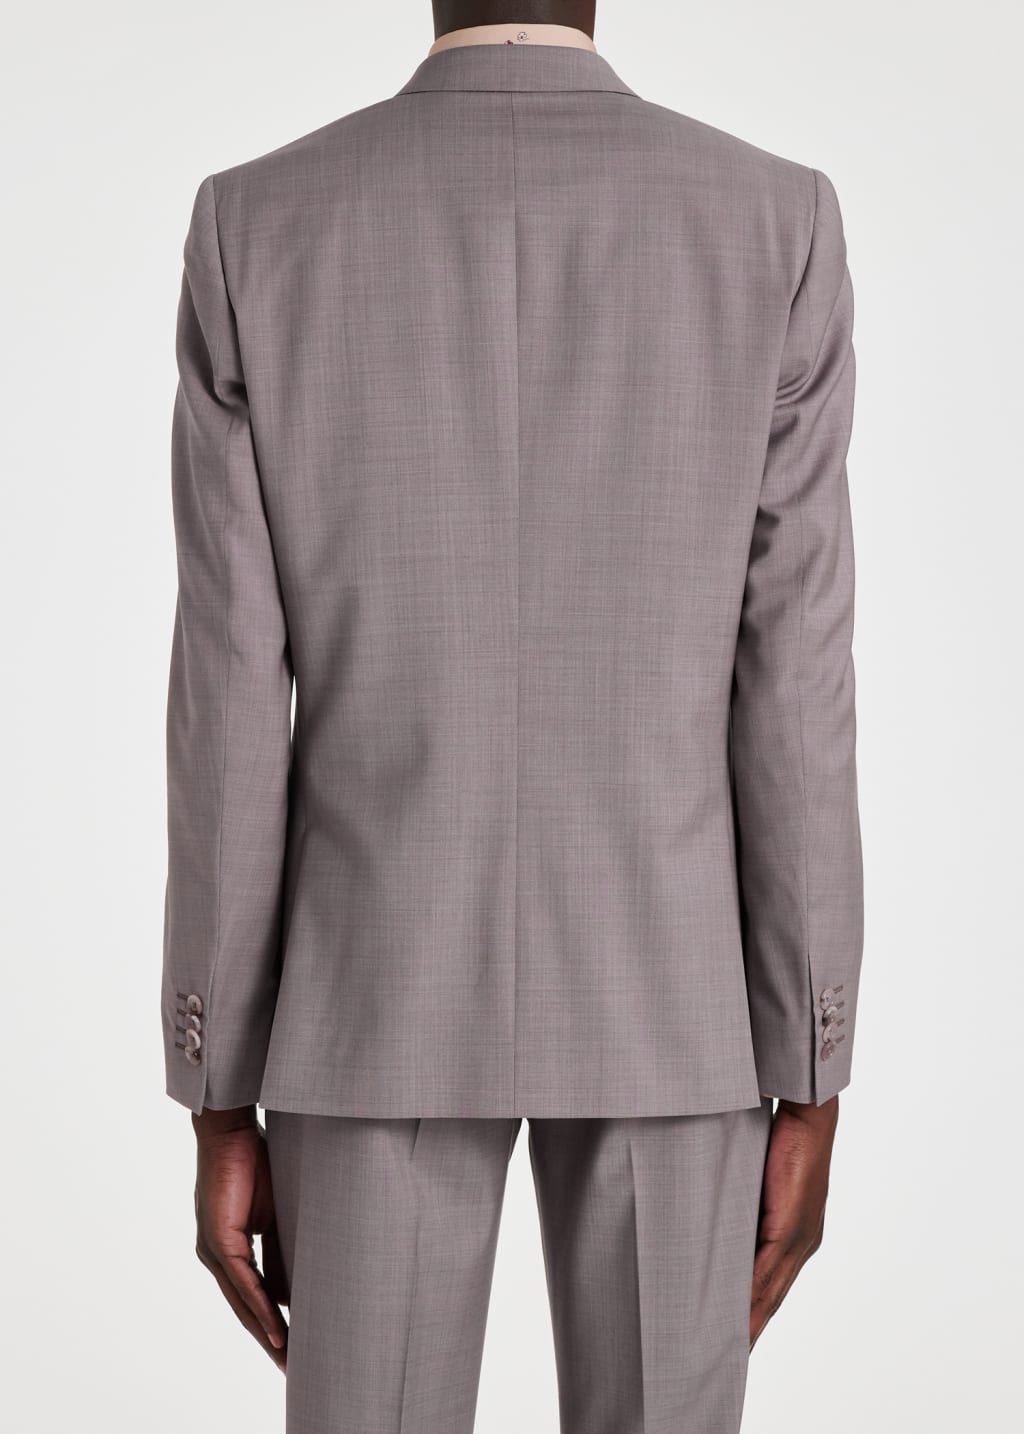 Model View - The Soho - Tailored-Fit Lavender Wool Suit Paul Smith